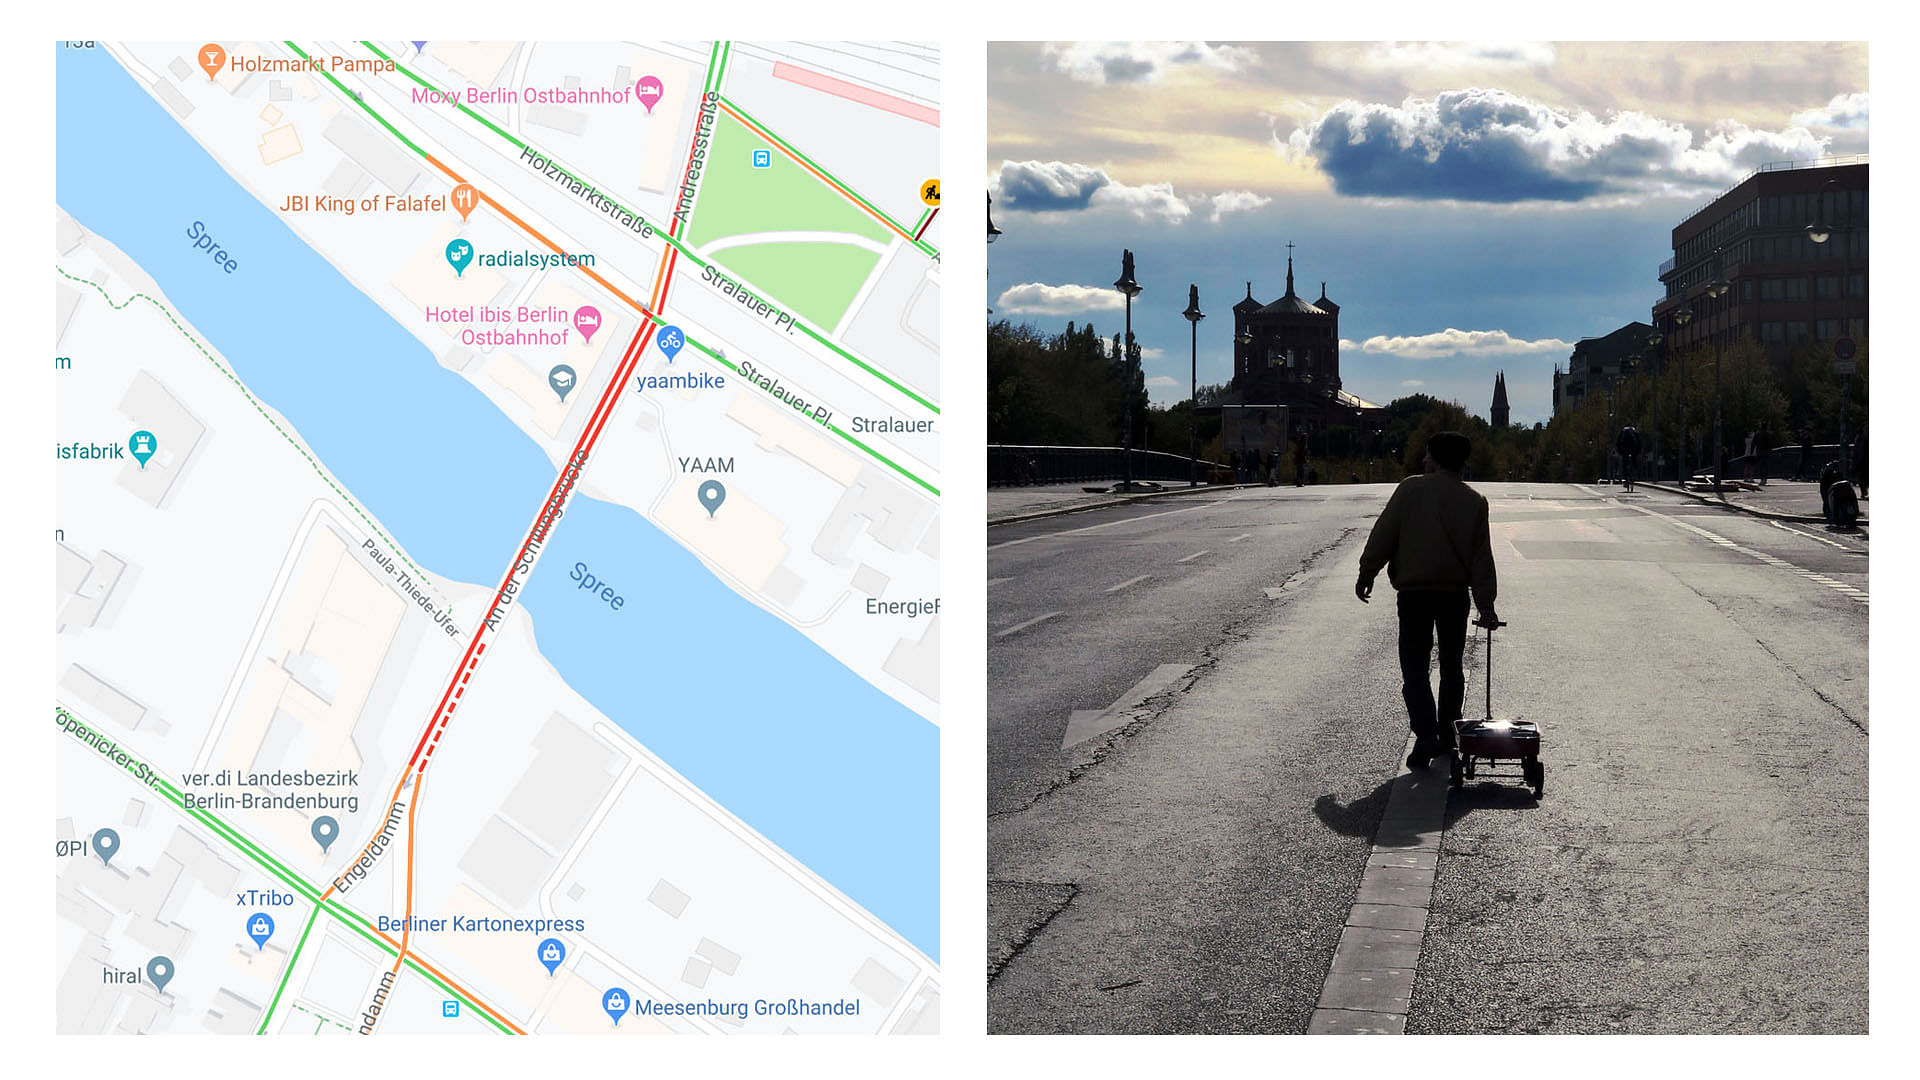 Weckert put 99 phones with Google Maps navigation turned on in a cart and he walked along the empty streets of Berlin. (Photo: Simon Weckert website)